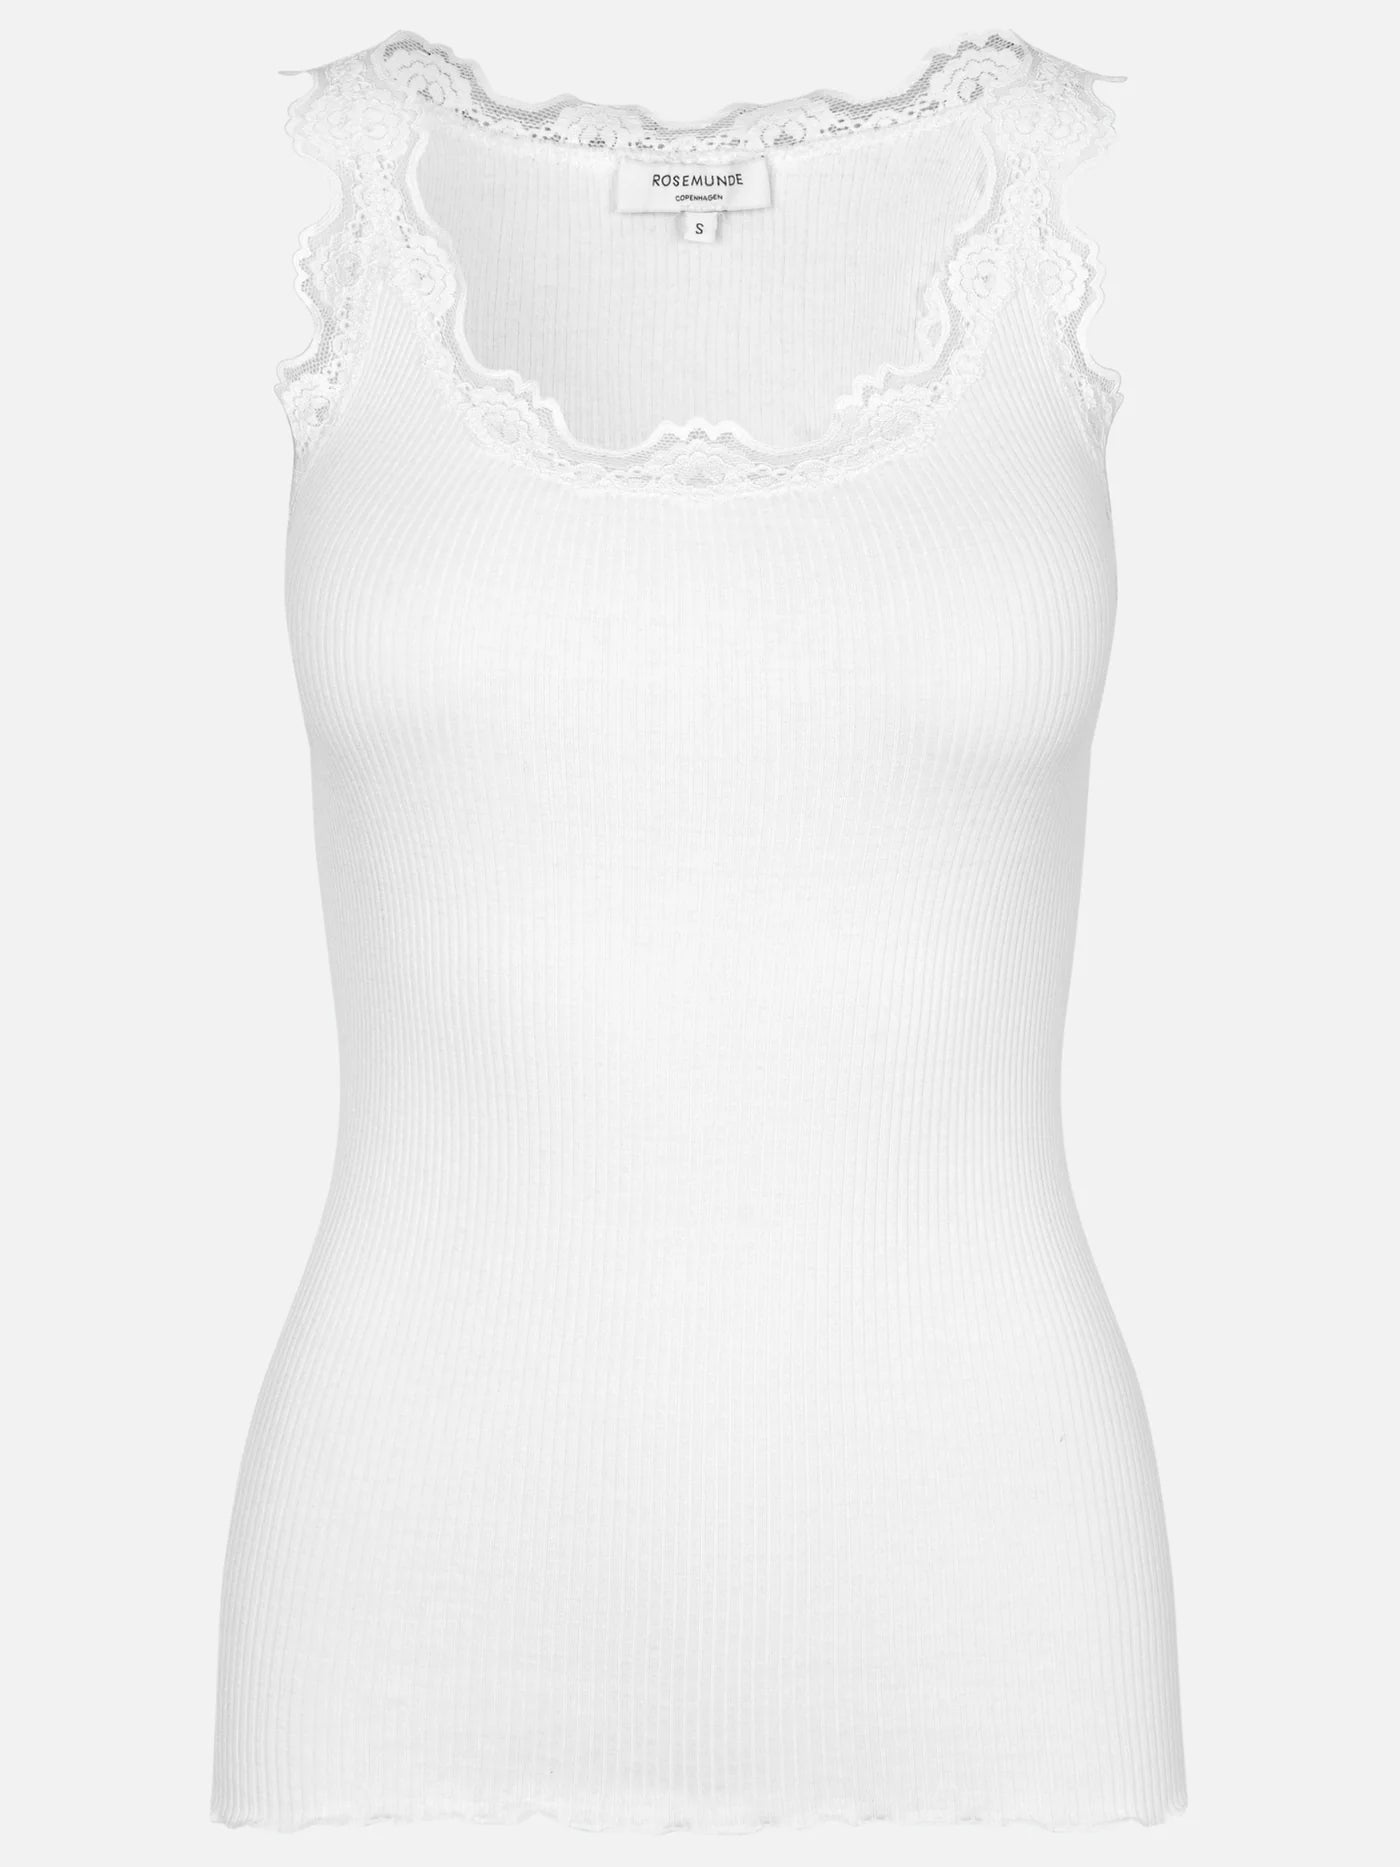 A Rosemunde Silk Lace Top with signature lace detailing.